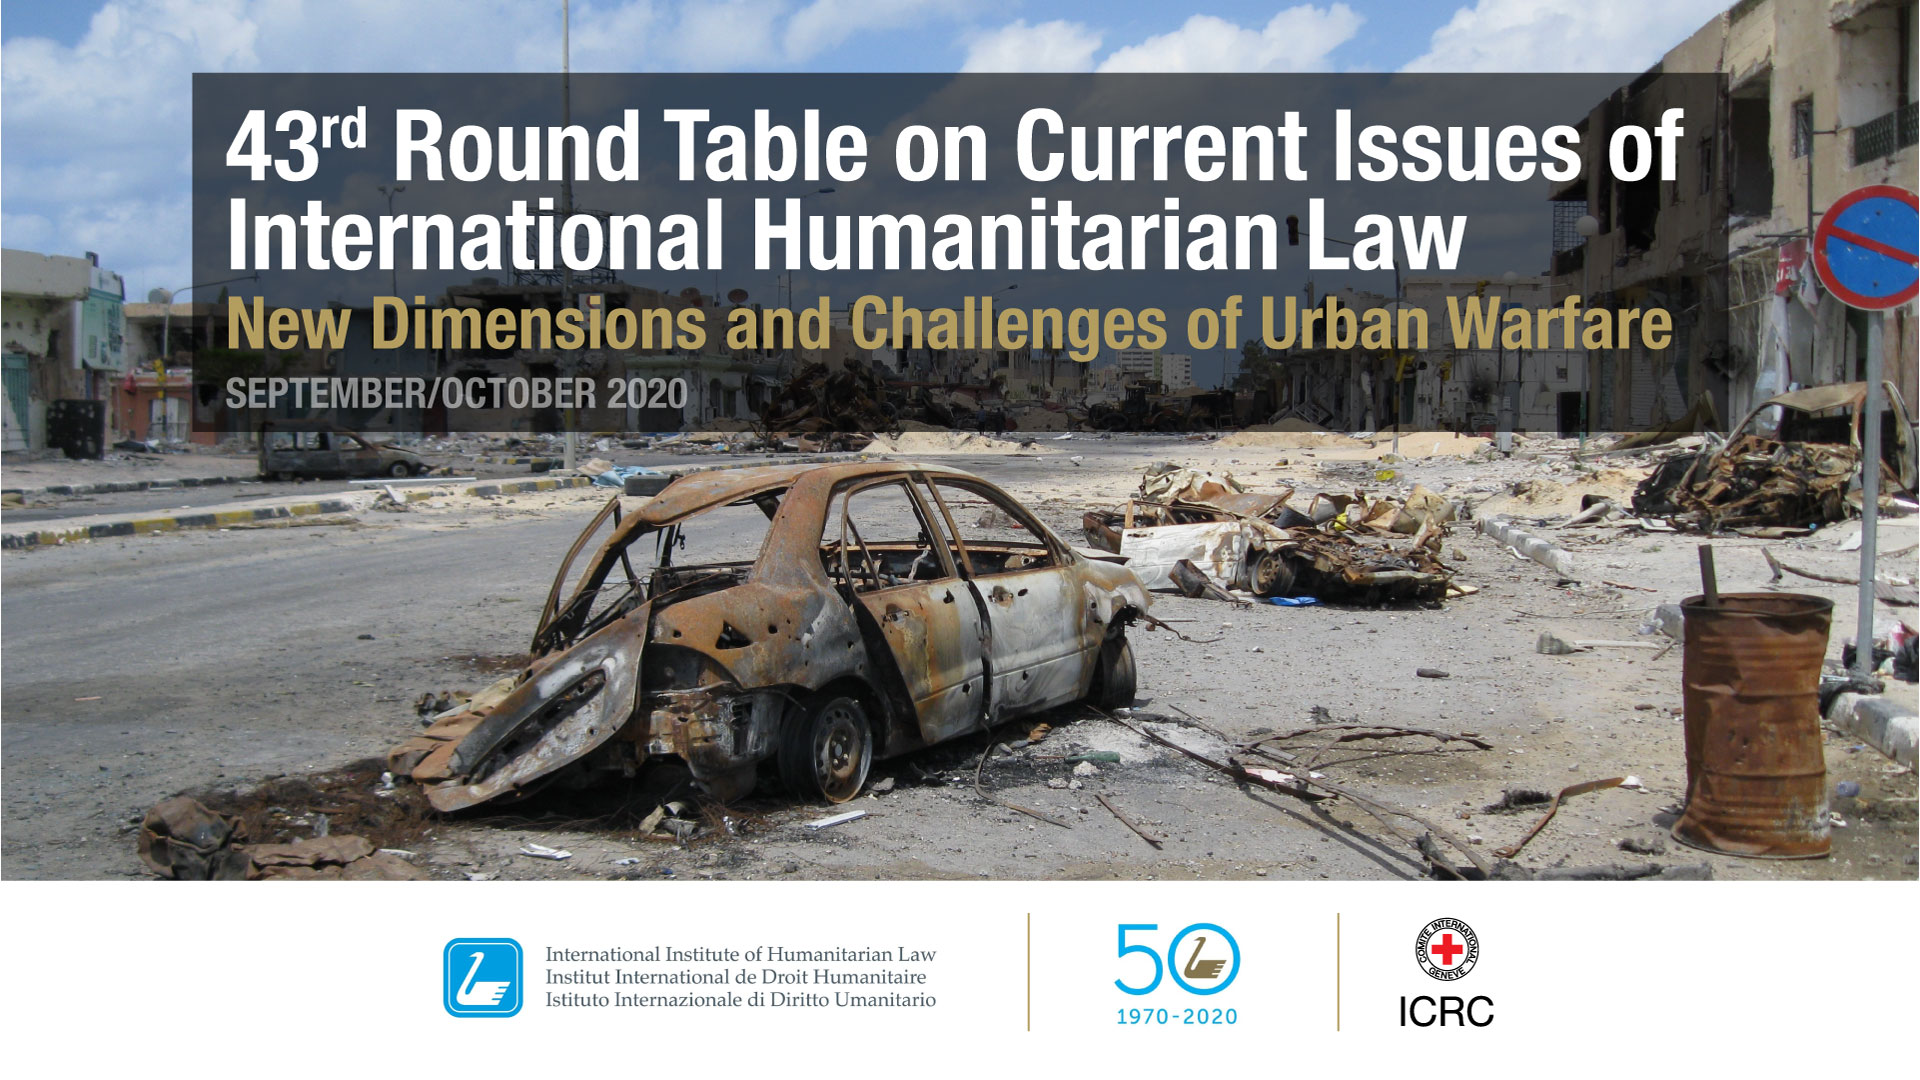 43rd Sanremo Round Table on “New Dimensions and Challenges of Urban Warfare” – The figures